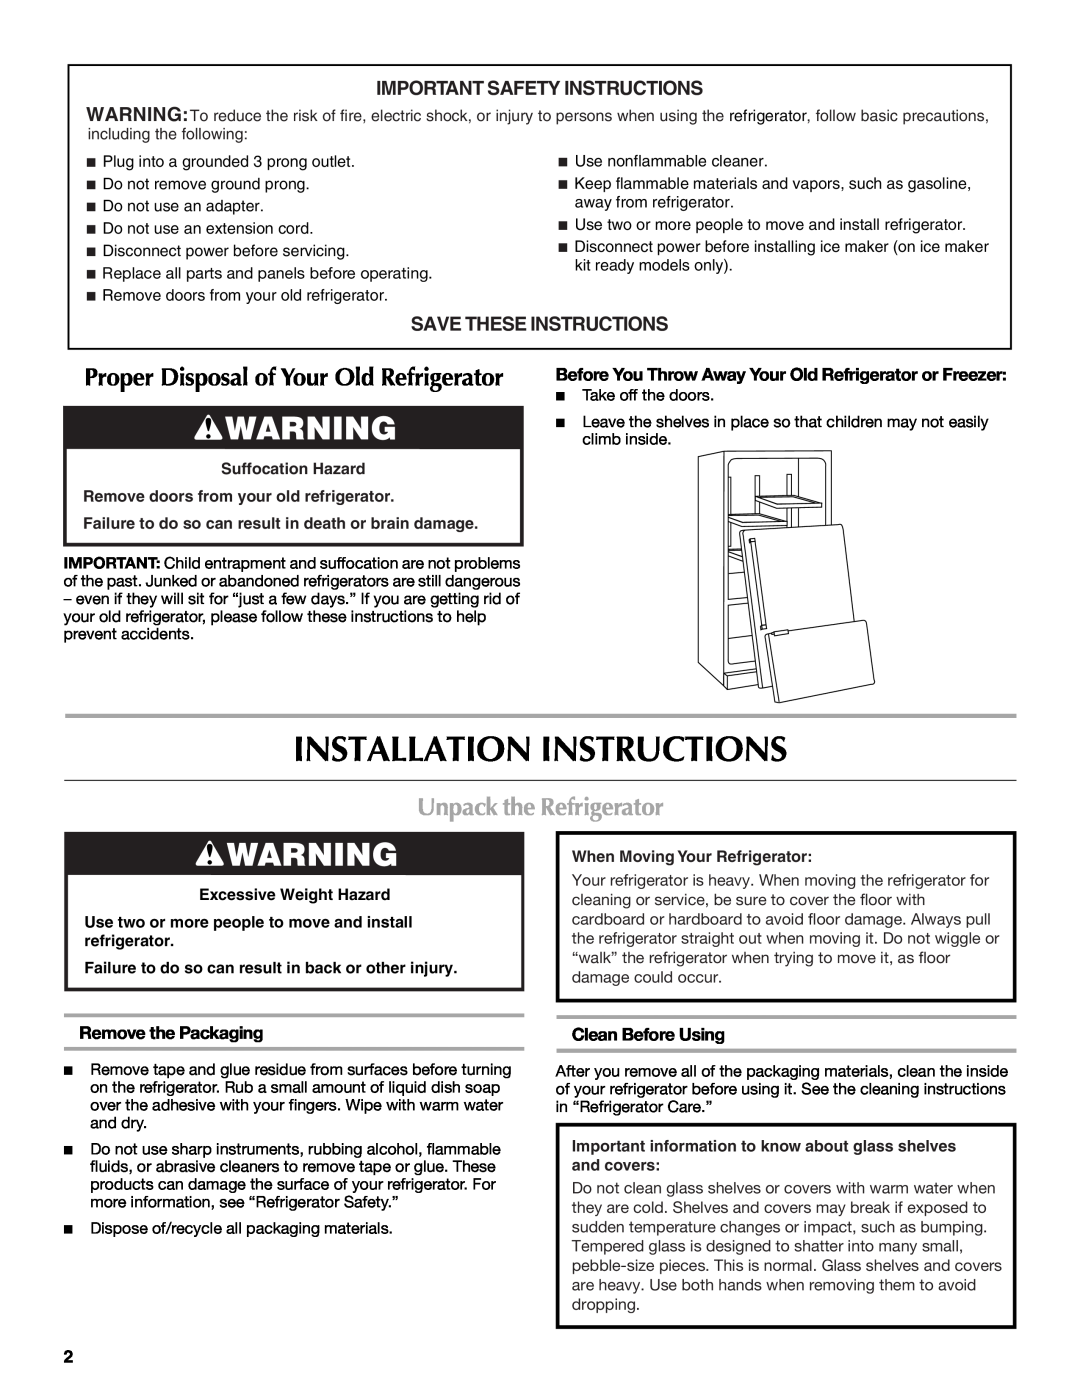 Maytag MFD2562VEW Installation Instructions, Unpack the Refrigerator, Proper Disposal of Your Old Refrigerator 